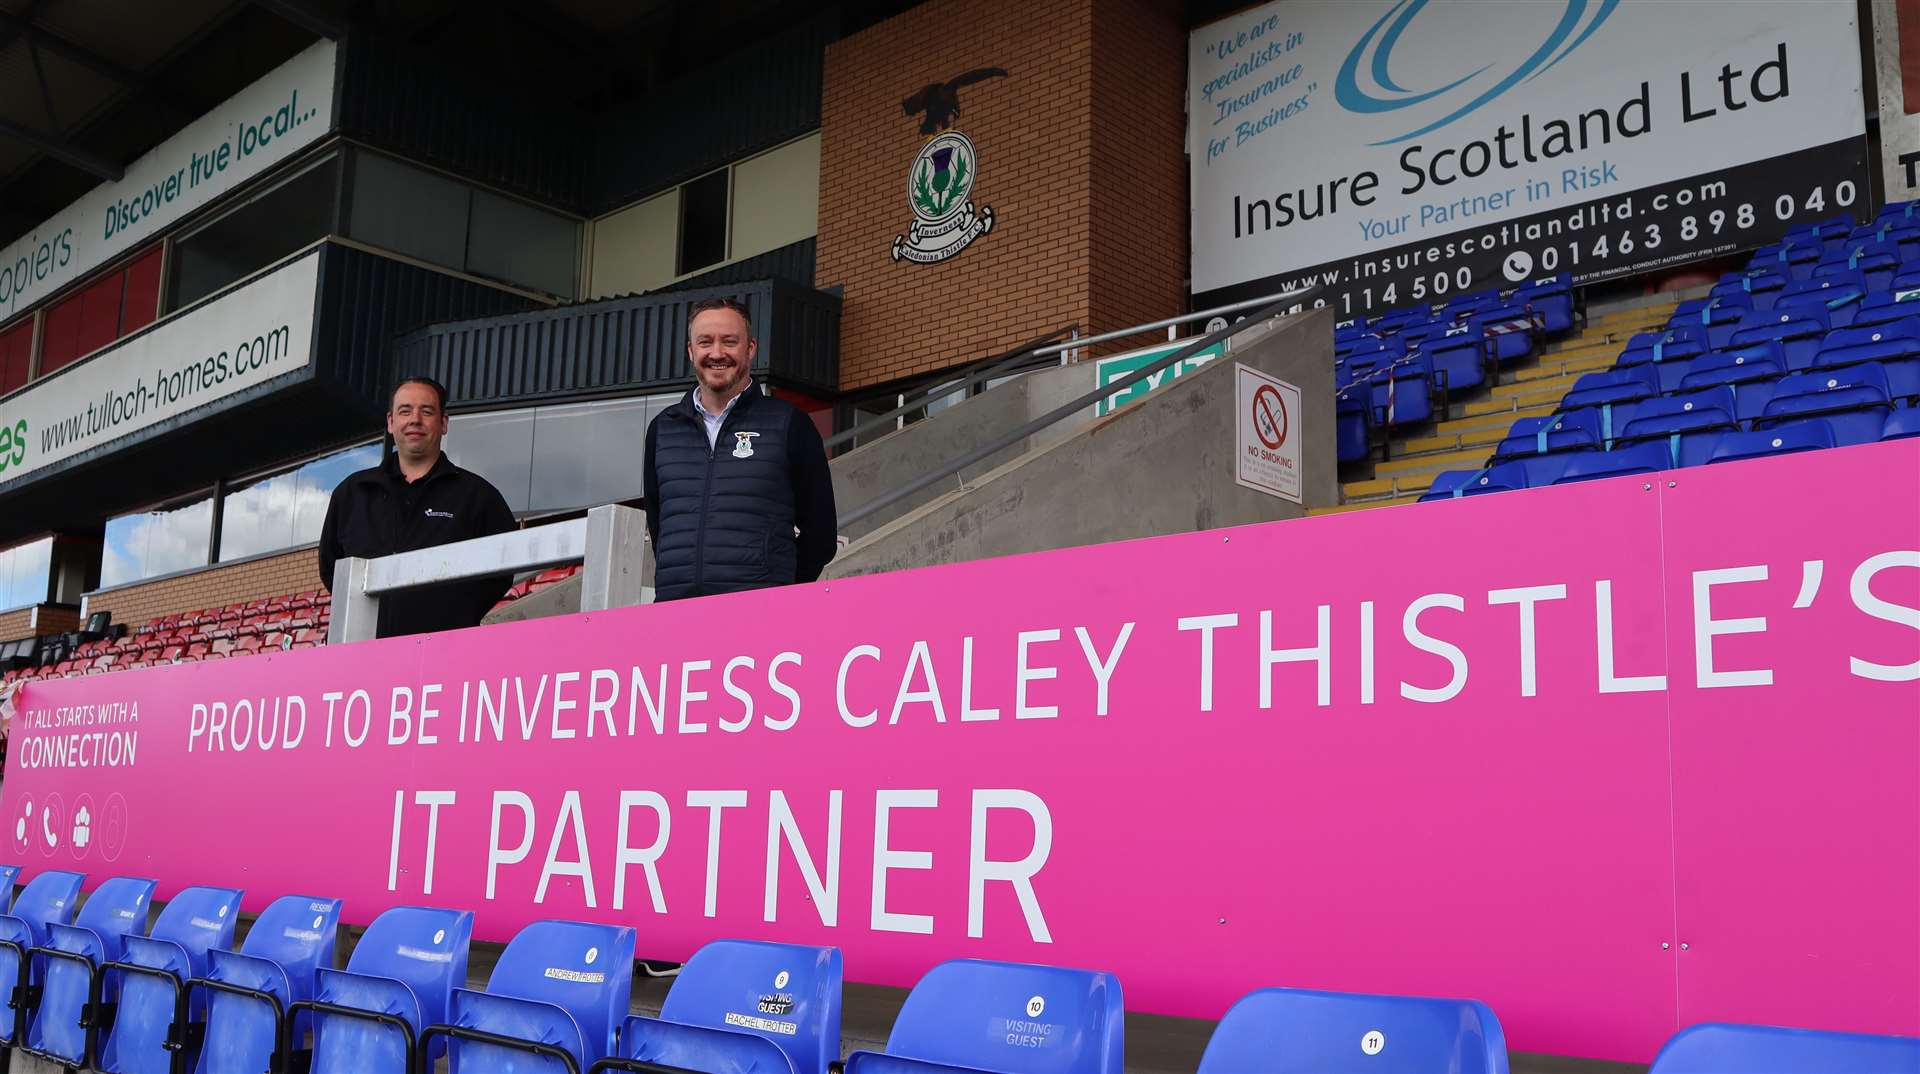 Andy Mckay, General Manager, Converged and Keith Haggart, Commercial Manager, ICTFC celebrate IT partnership at Caledonian Stadium.